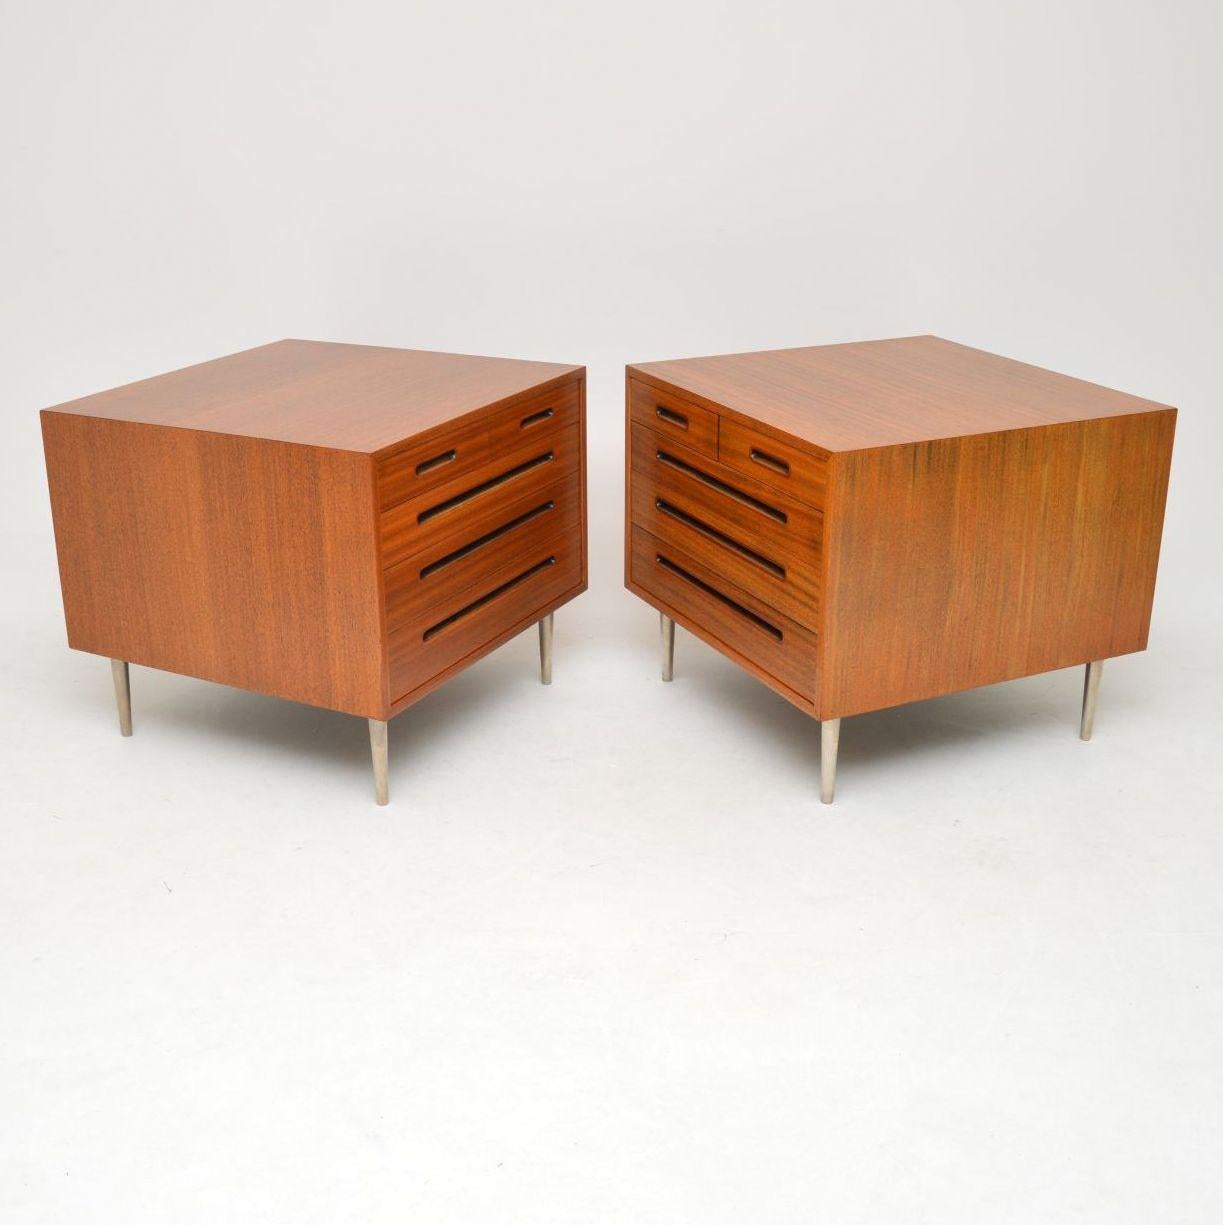 Mid-Century Modern 1960s Pair of Vintage Mahogany Chests by Edward Wormley for Dunbar